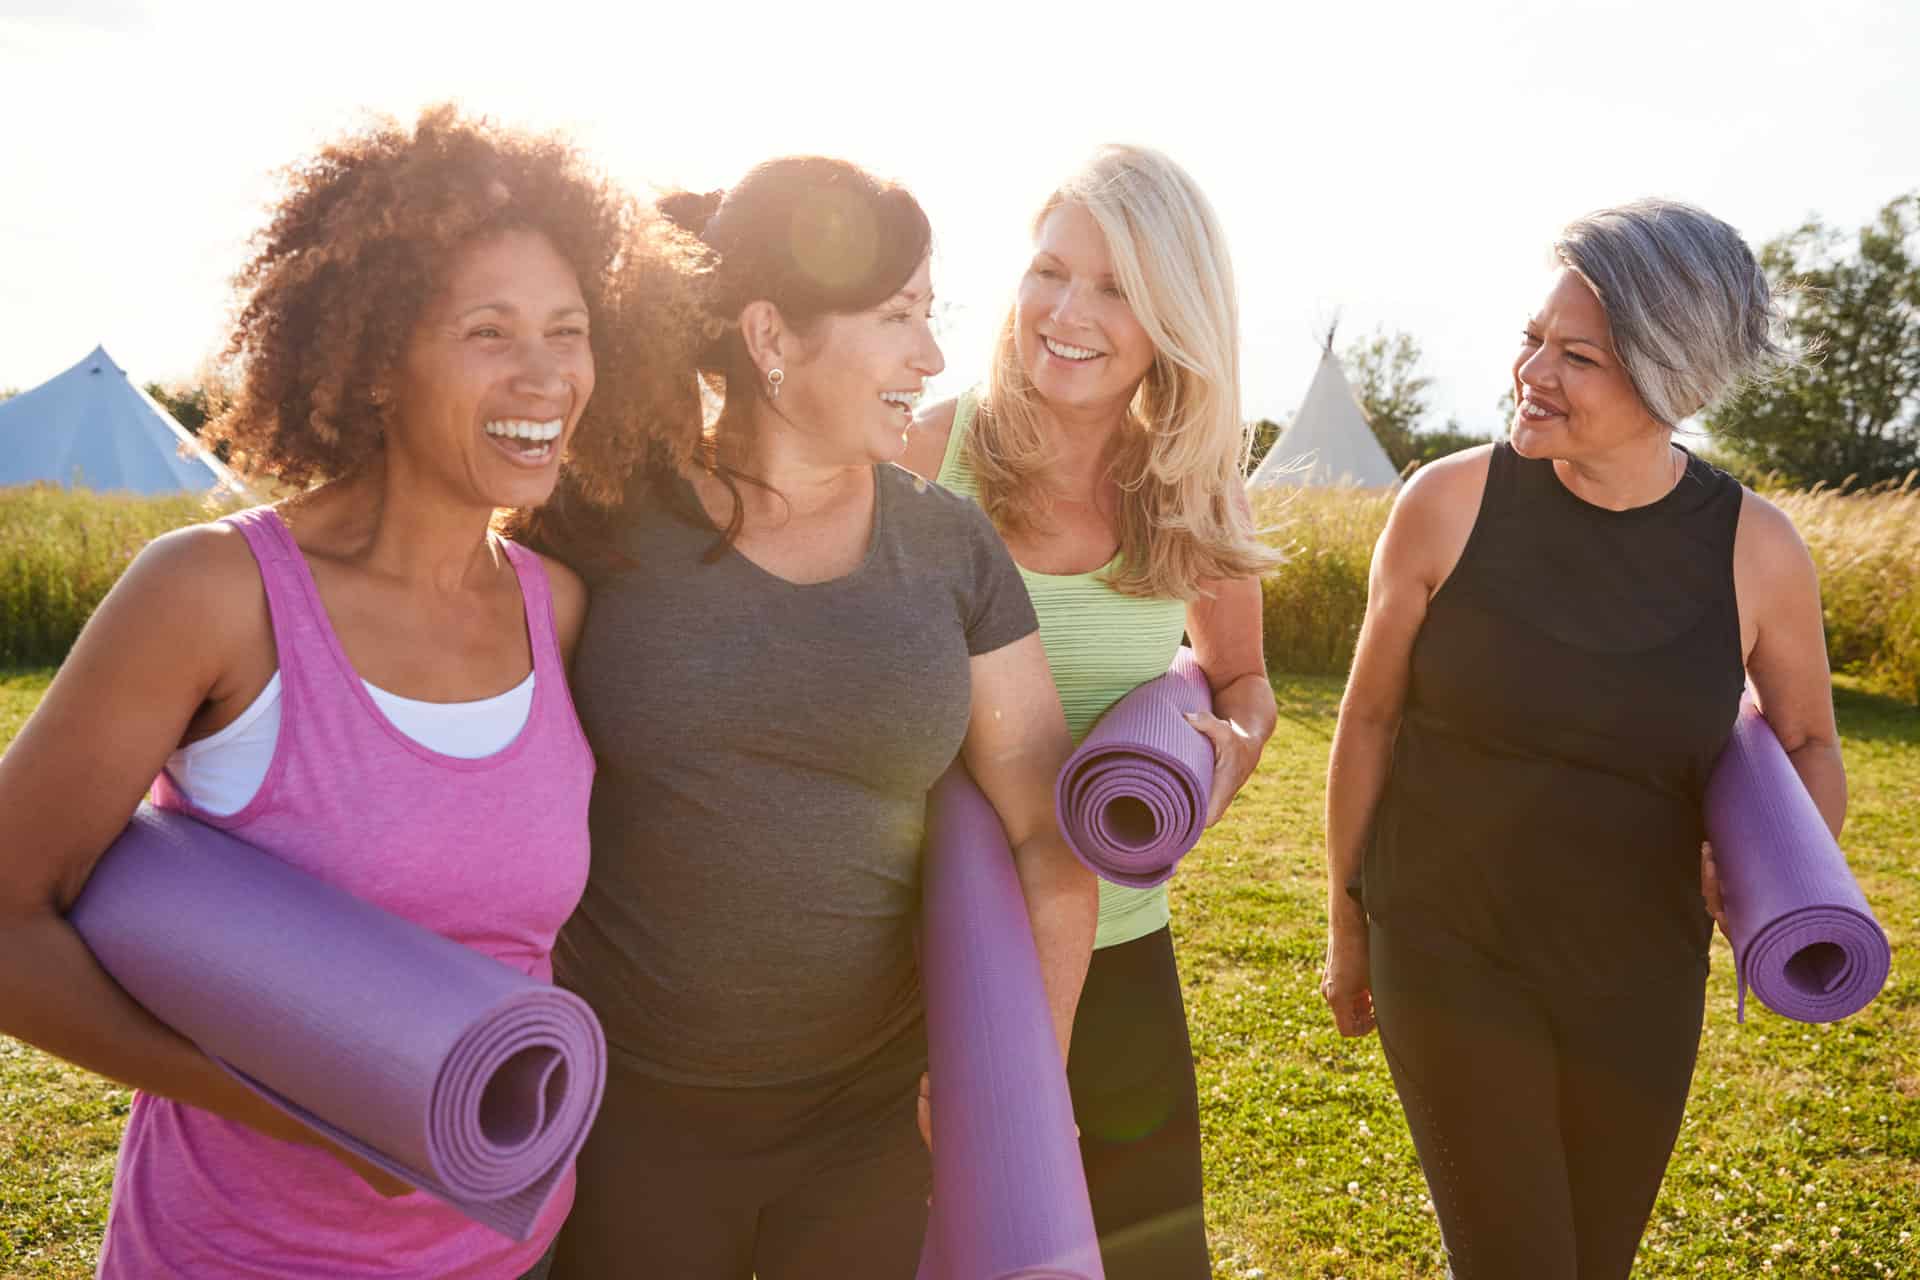 mct-oil-group-of-mature-female-friends-on-outdoor-yoga-retreat-walking-along-path